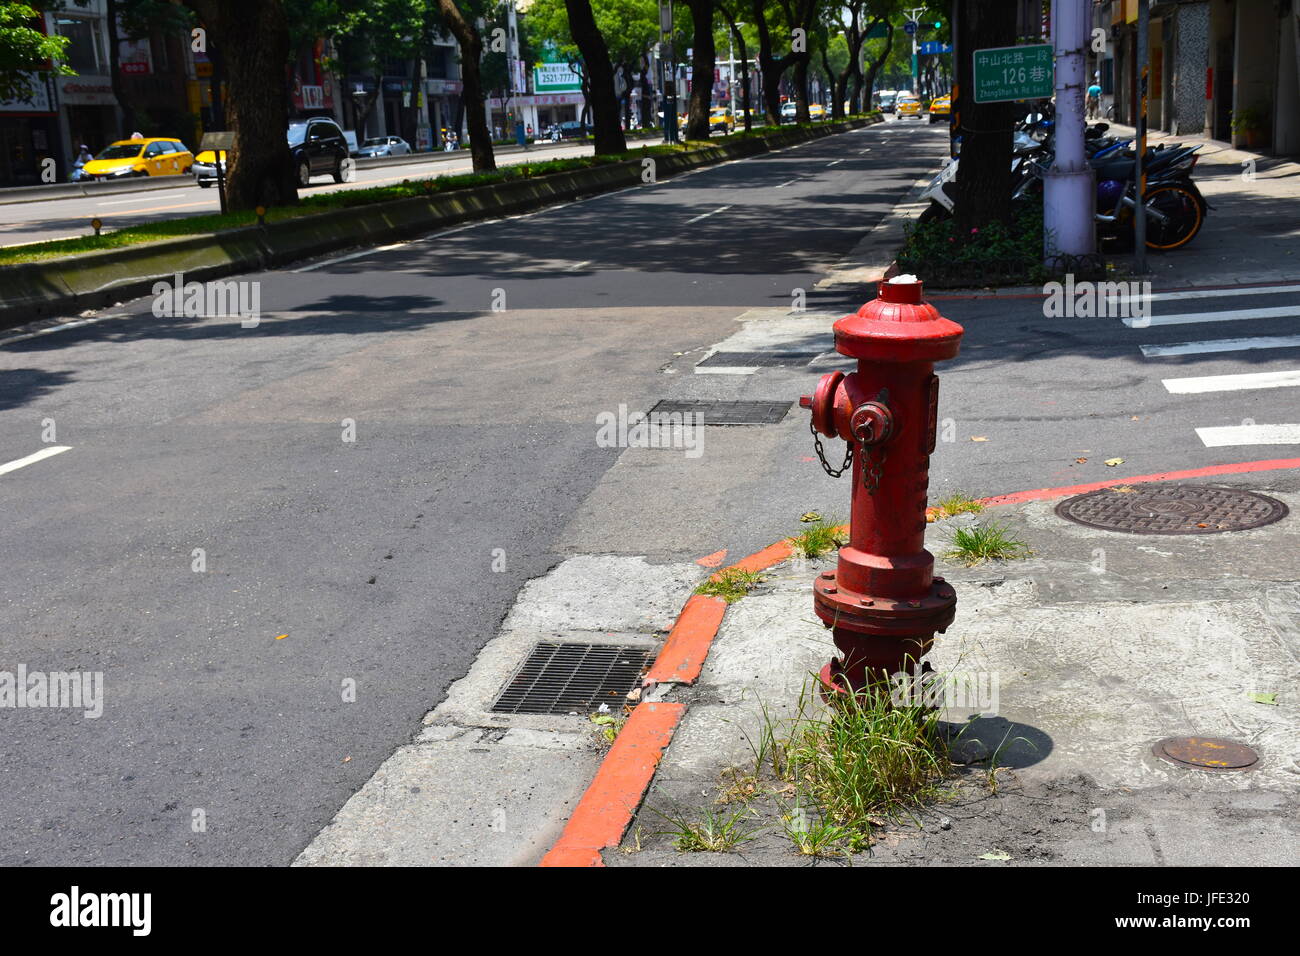 A fire hydrant on the side of the road on a corner in Taipei, Taiwan. Stock Photo